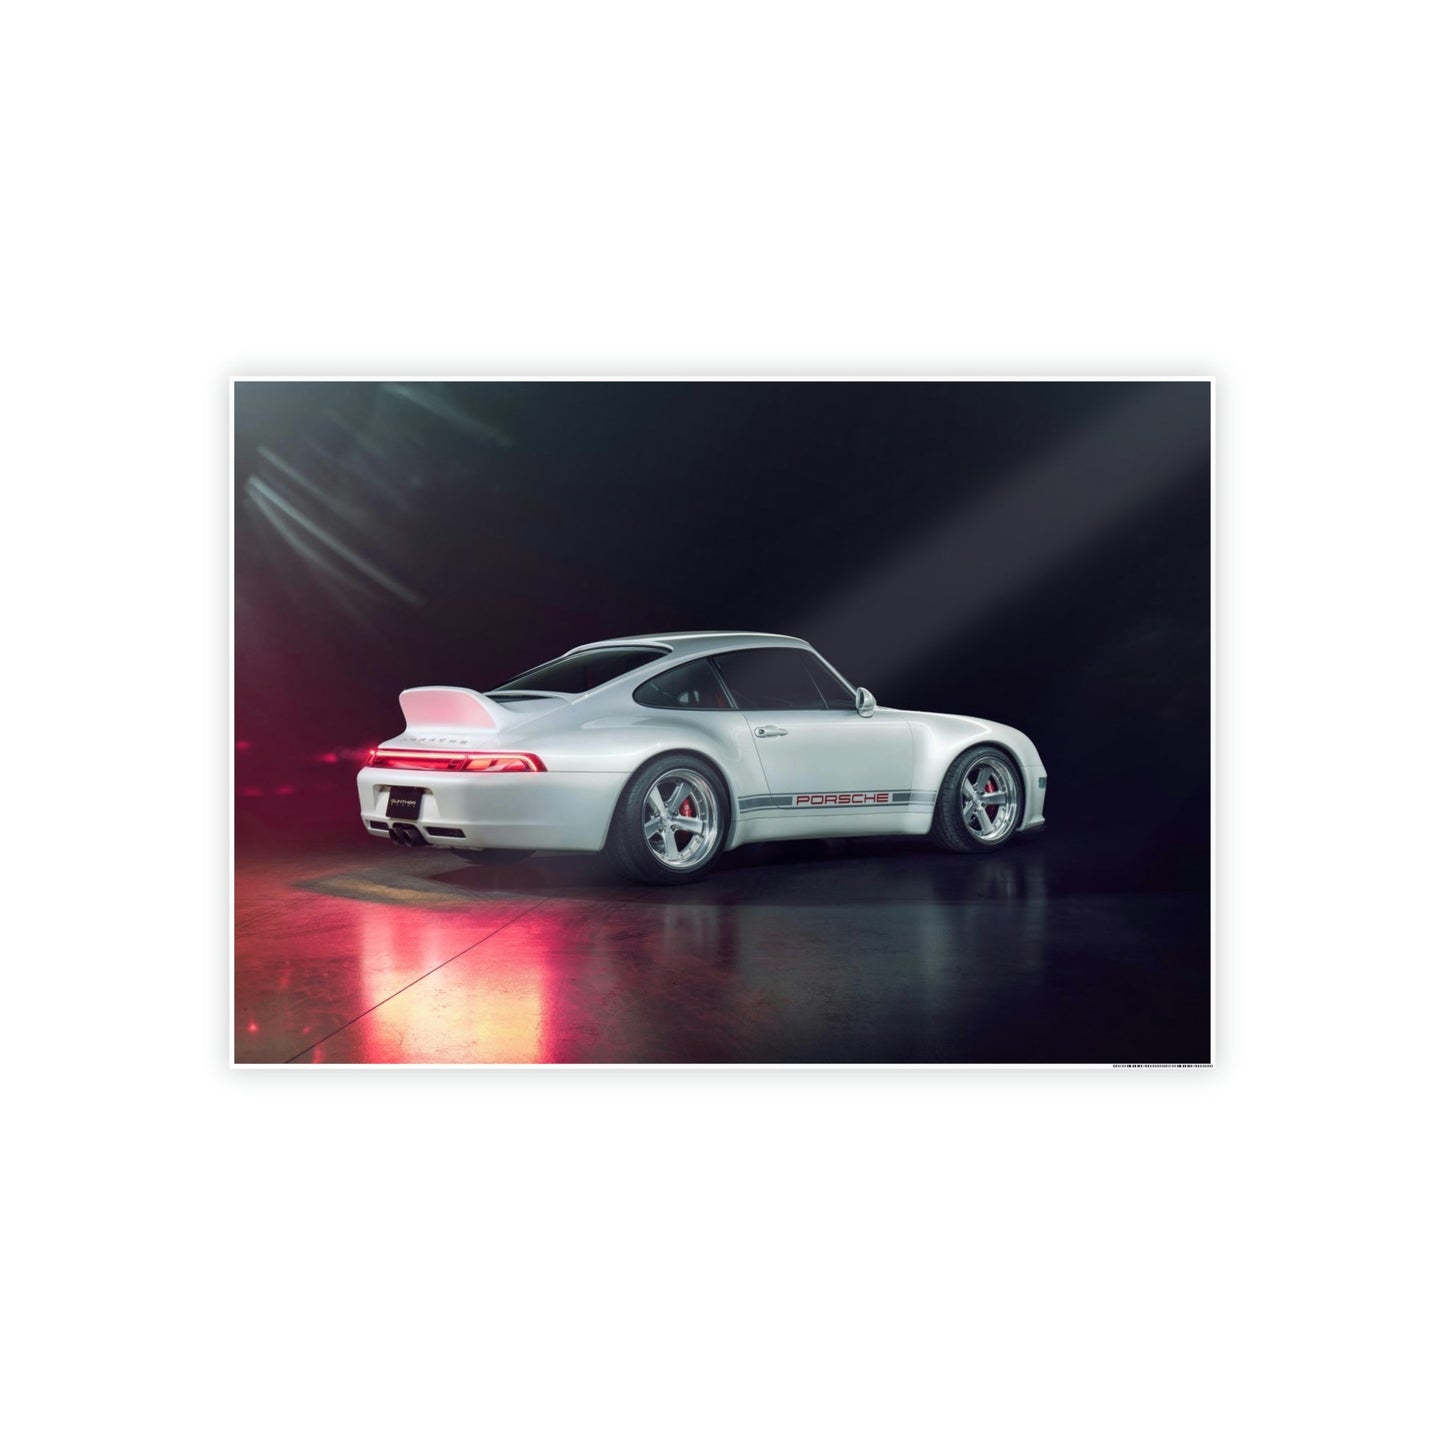 Porsche in Motion: Dynamic Print on Canvas for Racing Fans